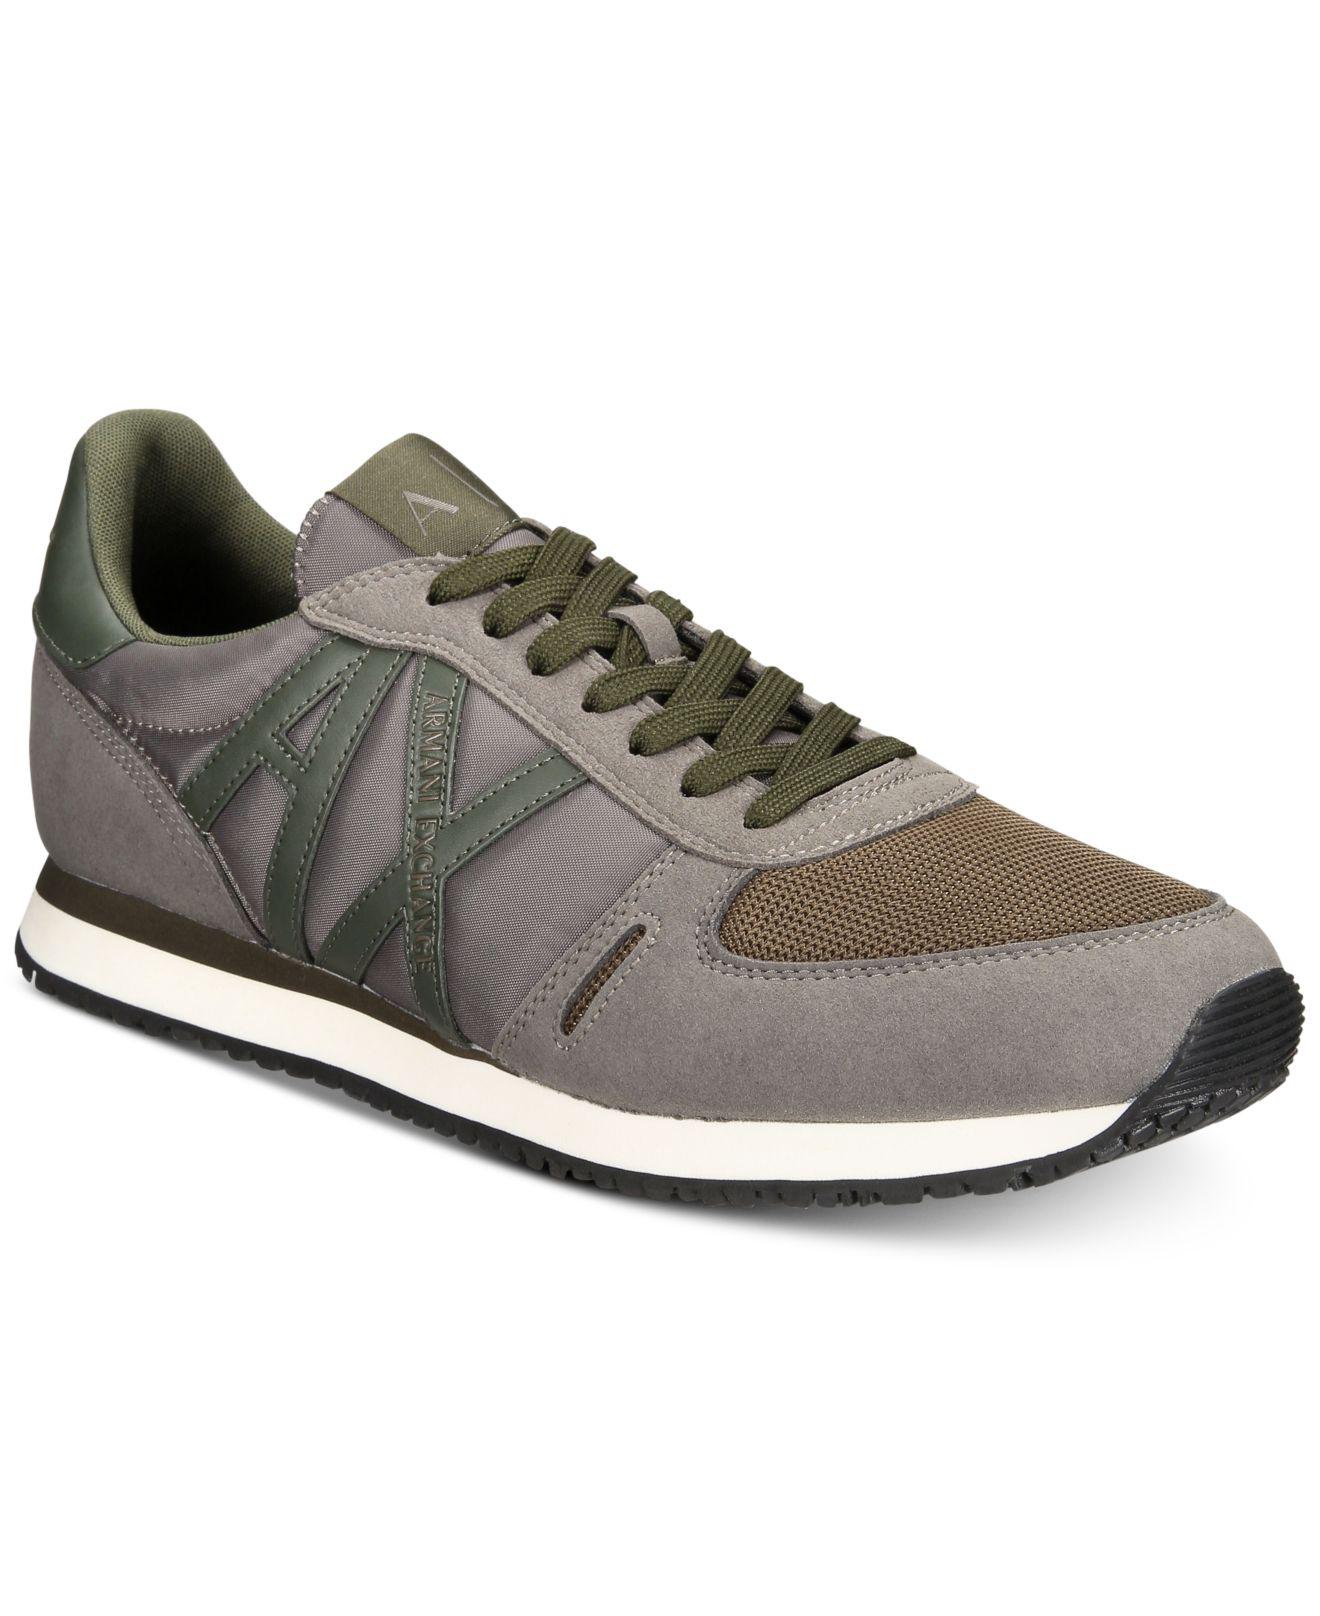 Armani Exchange Ax Jogger Sneakers for Men - Lyst